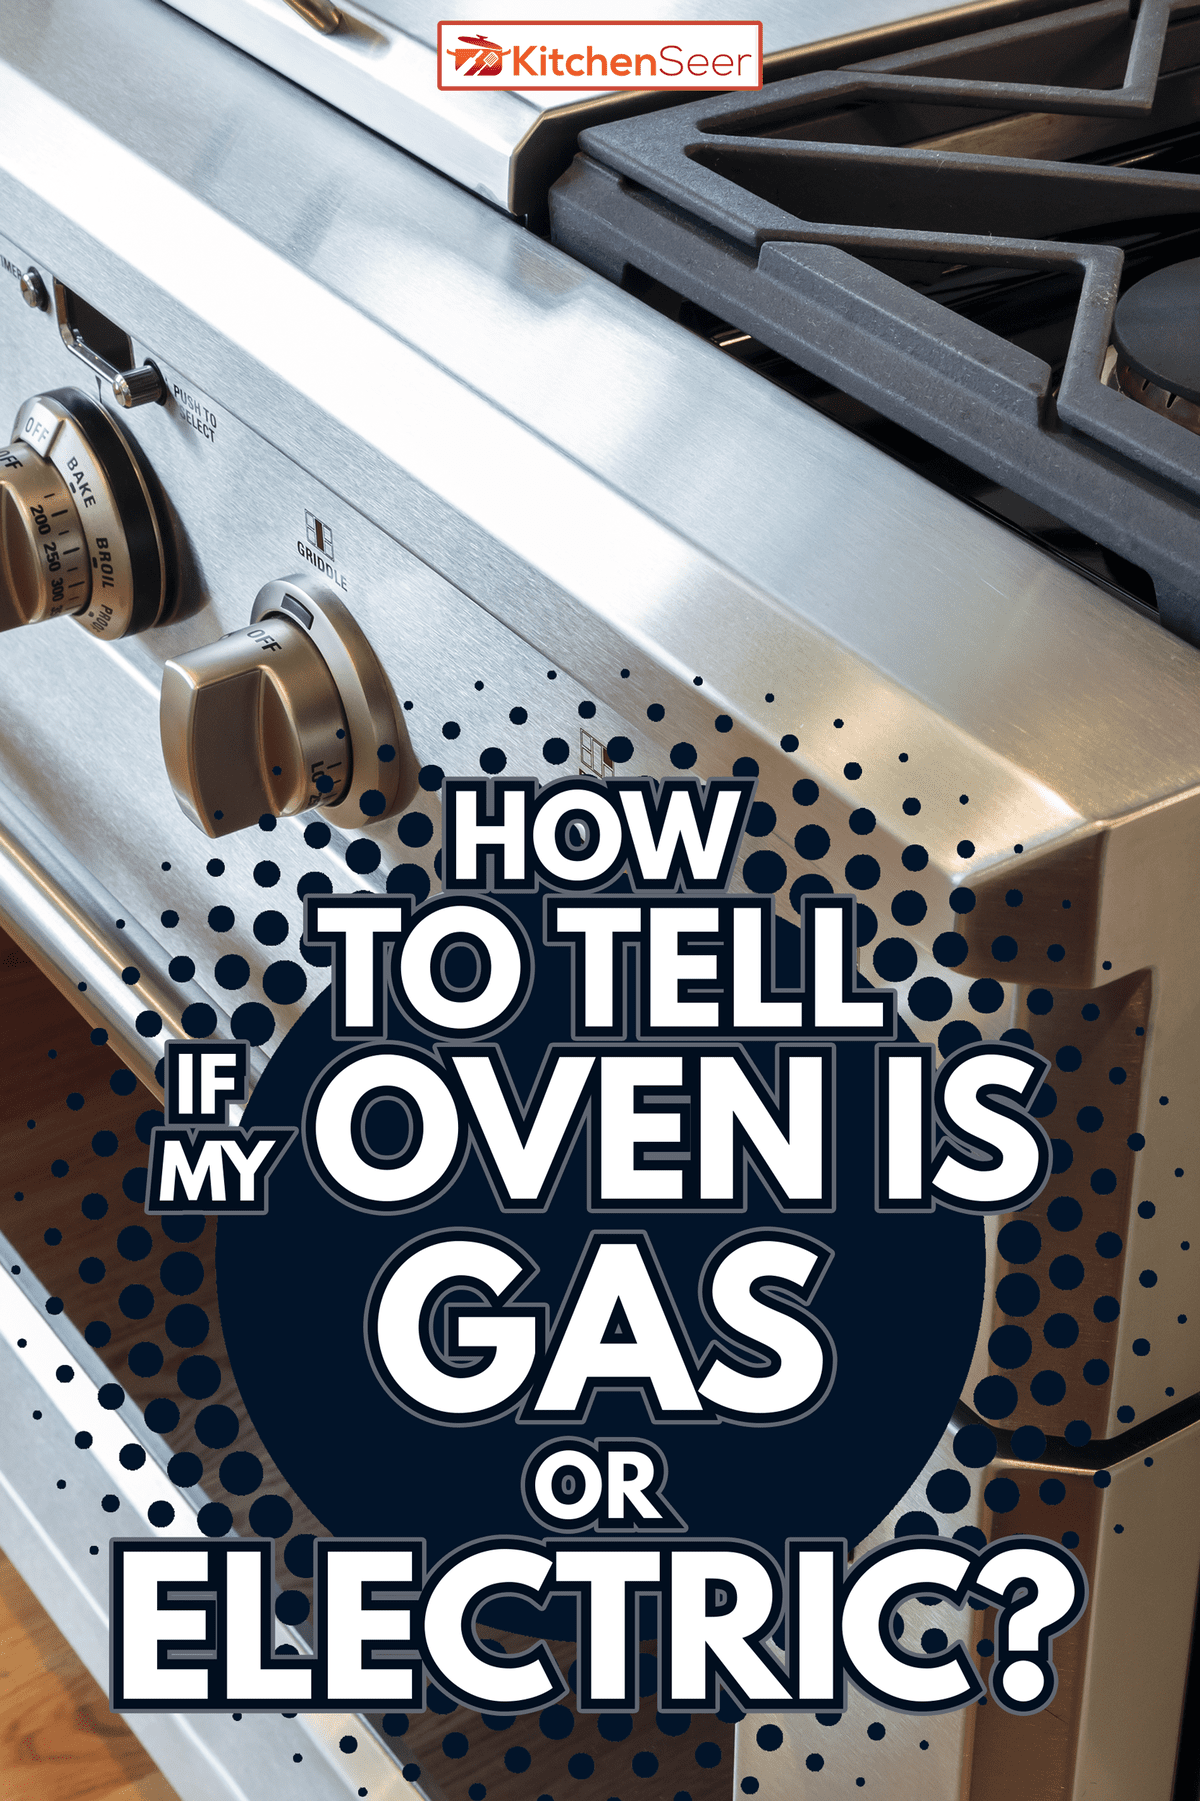 Close up stainless steel stove with oven, professional grade - How To Tell If My Oven Is Gas or Electric